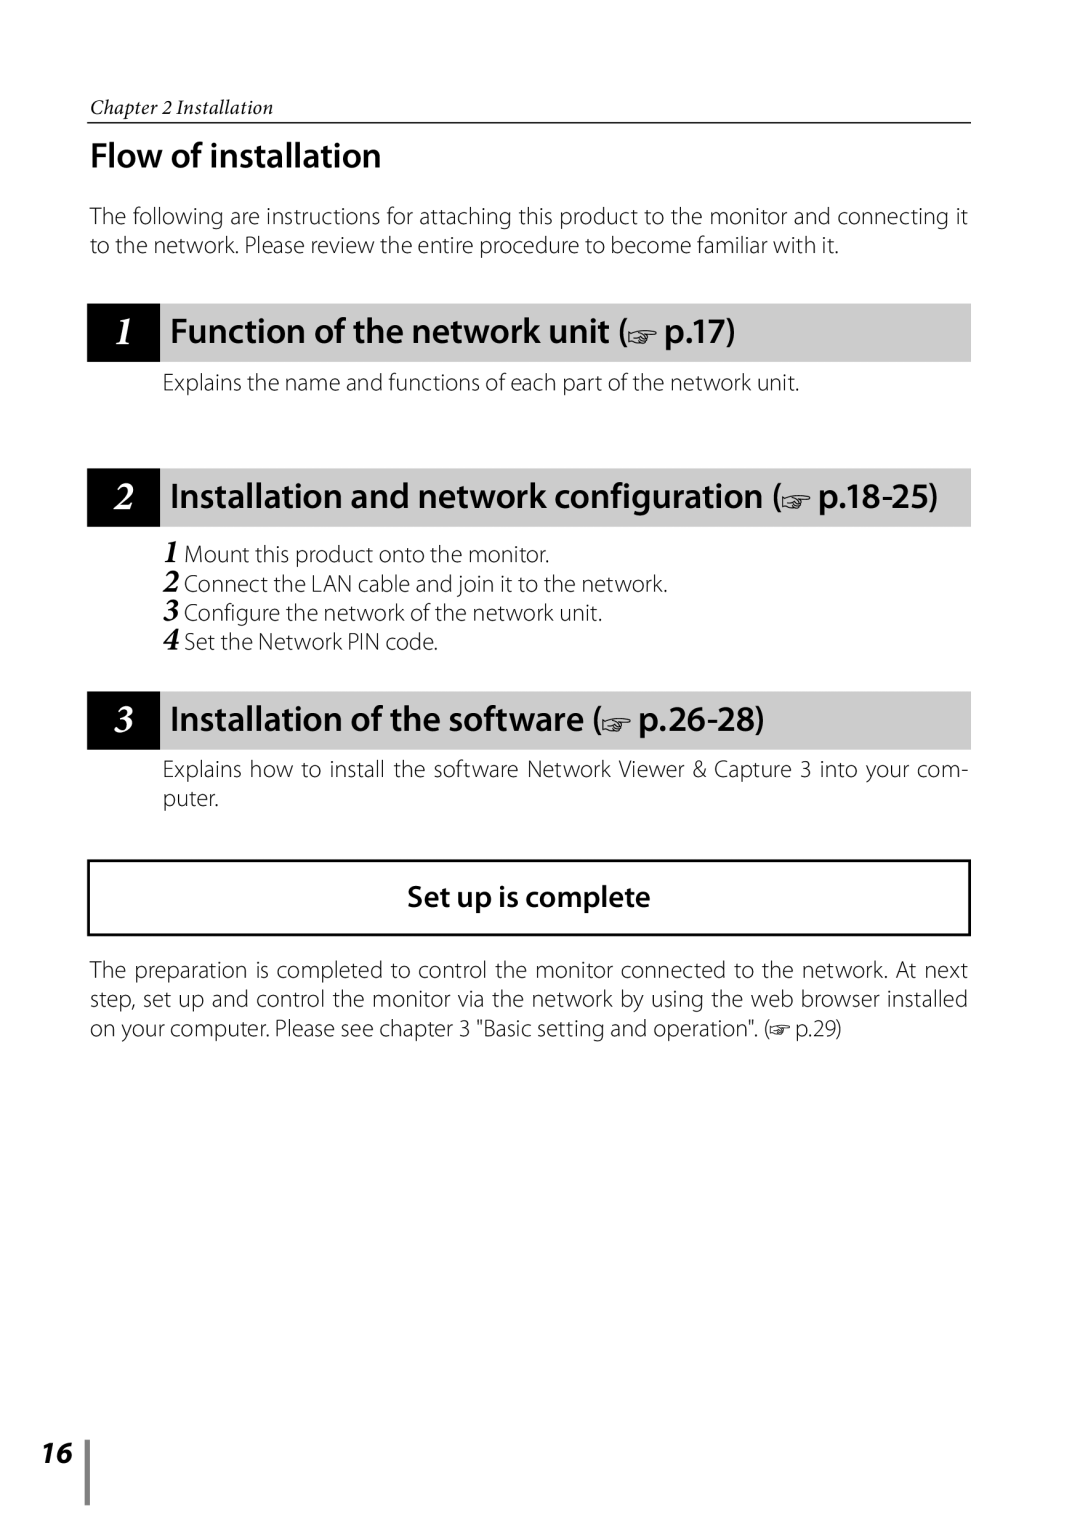 Sanyo POA-LN02 Flow of installation, Function of the network unit p.17, Installation and network configuration p.18-25 